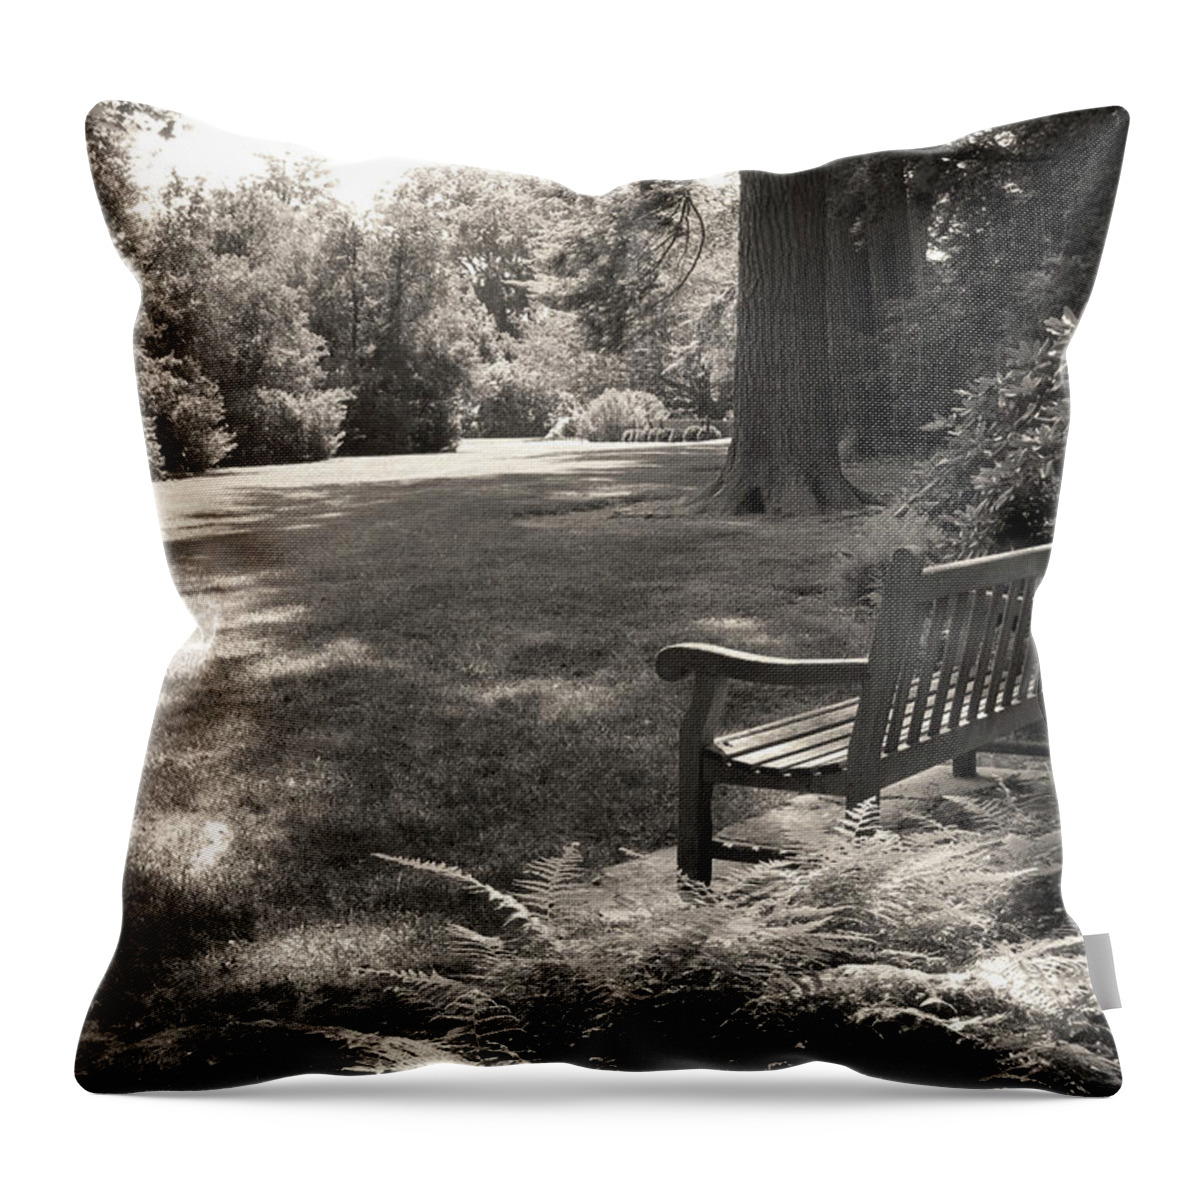 Shady Throw Pillow featuring the photograph Shady Bench by Gordon Beck